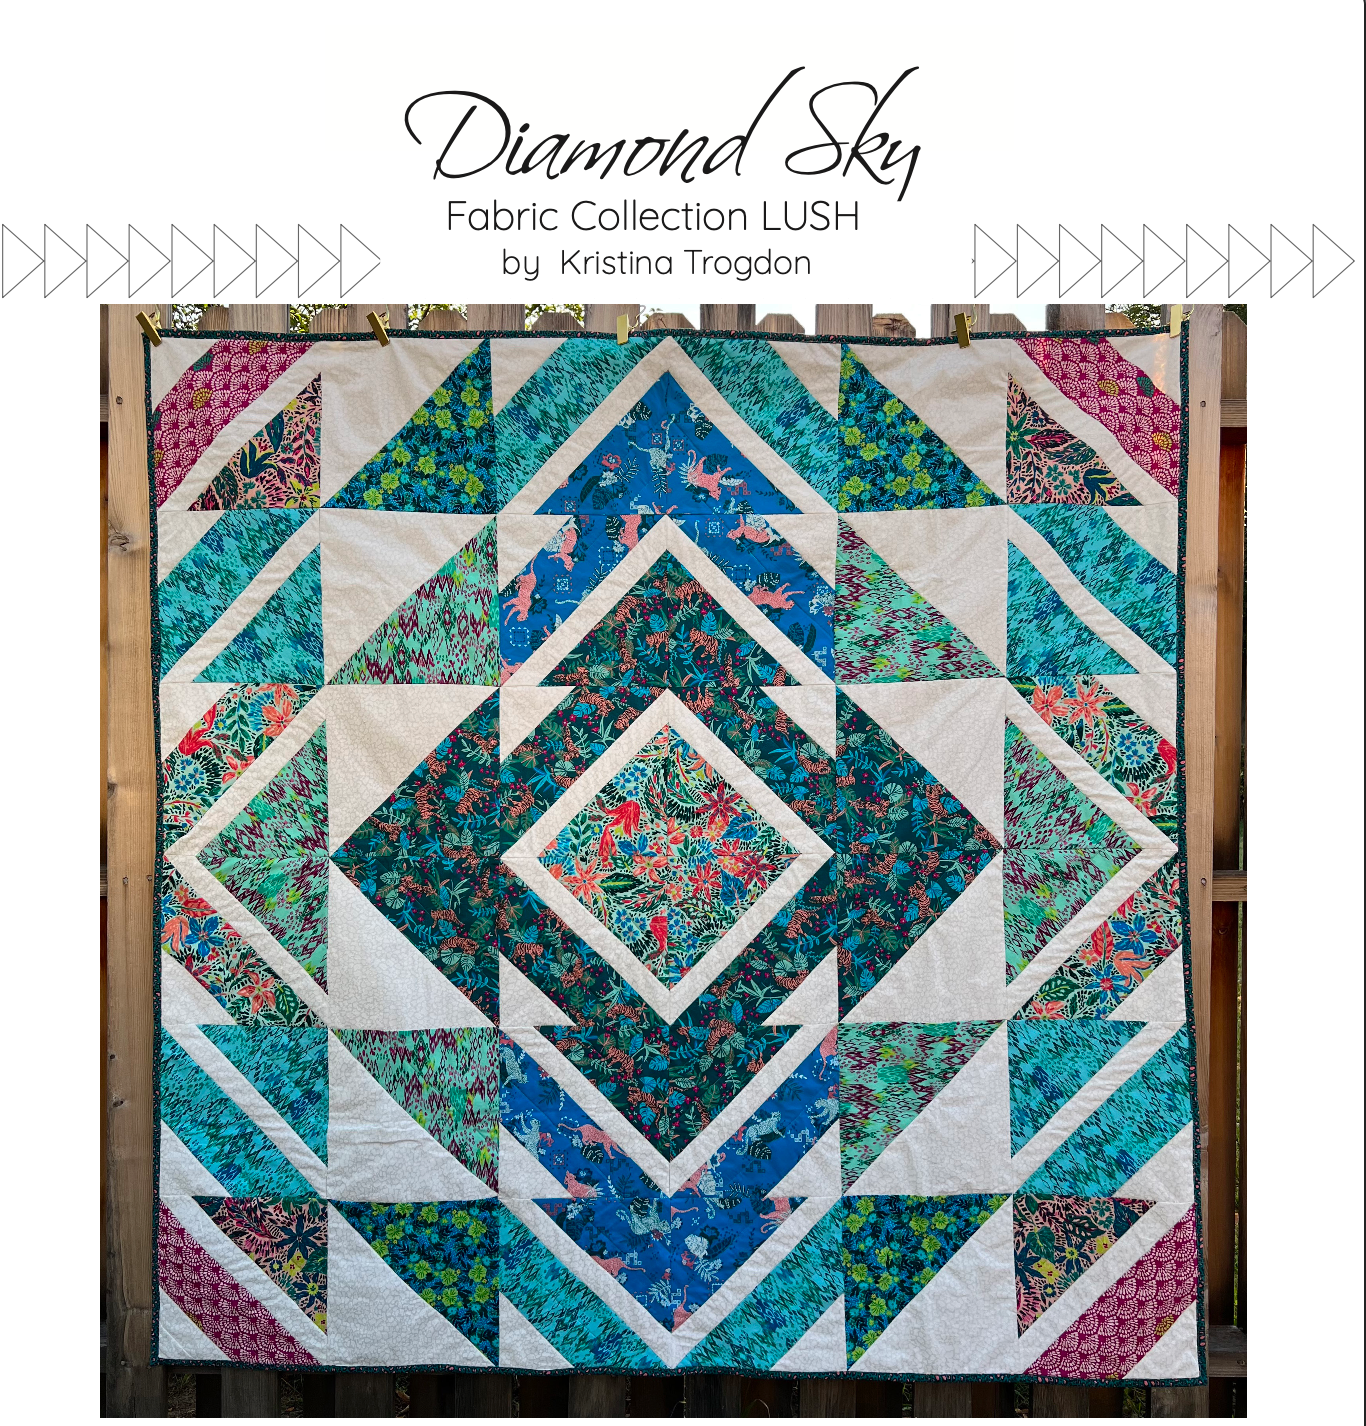 Available Now! Diamond Sky Quilt Pattern